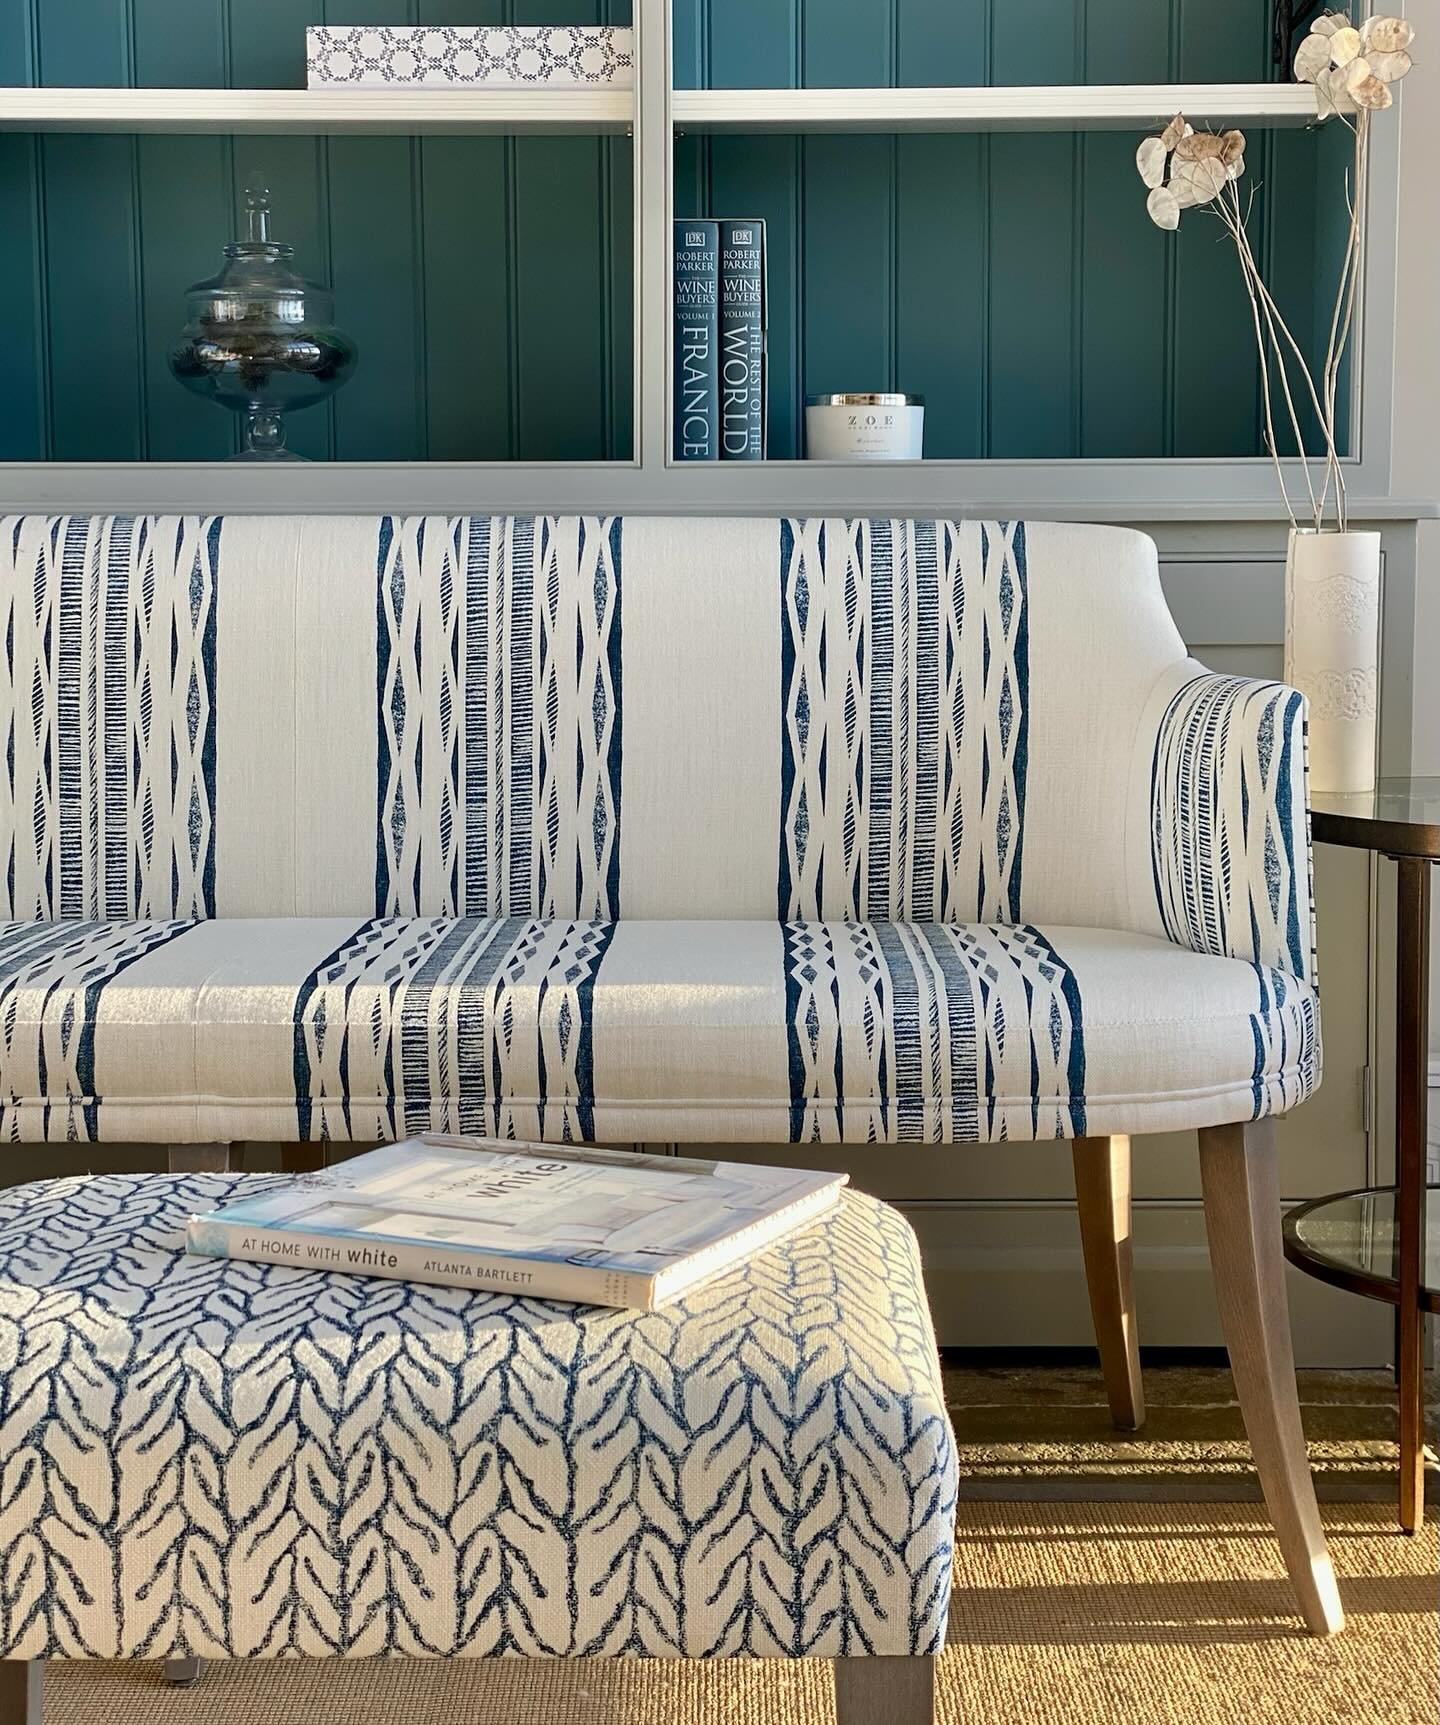 Summer in a fabric ☀️ - Willow Mesh printed linen in Inky Sky on an ivory, chunky pure linen is just perfect for fresh, summer vibes.  A clean, blue and white nod to coastal. 

Part of our Zoe &amp; Bee Collection with @osborninteriors 

In stock and